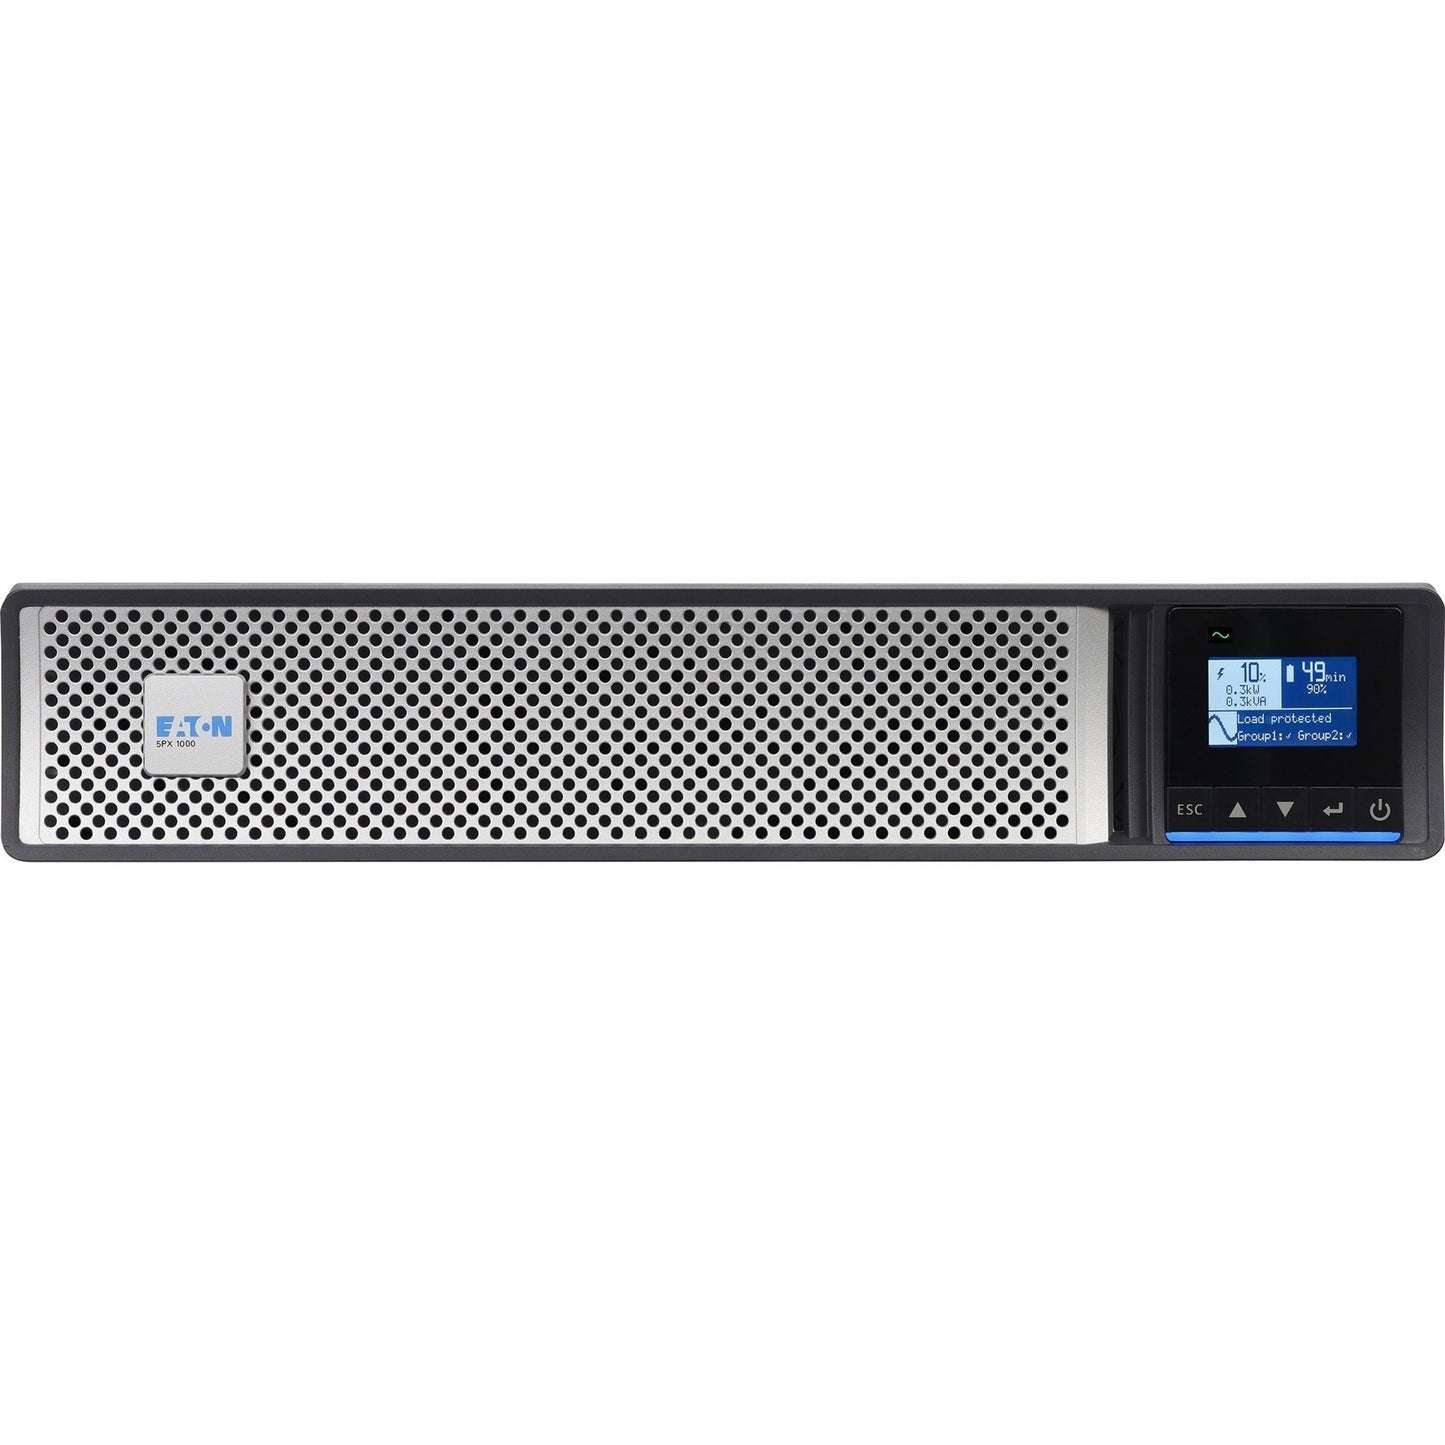 Eaton 5PX G2 1000VA 1000W 120V Line-Interactive UPS - 8 NEMA 5-15R Outlets Cybersecure Network Card Included Extended Run 2U Rack/Tower